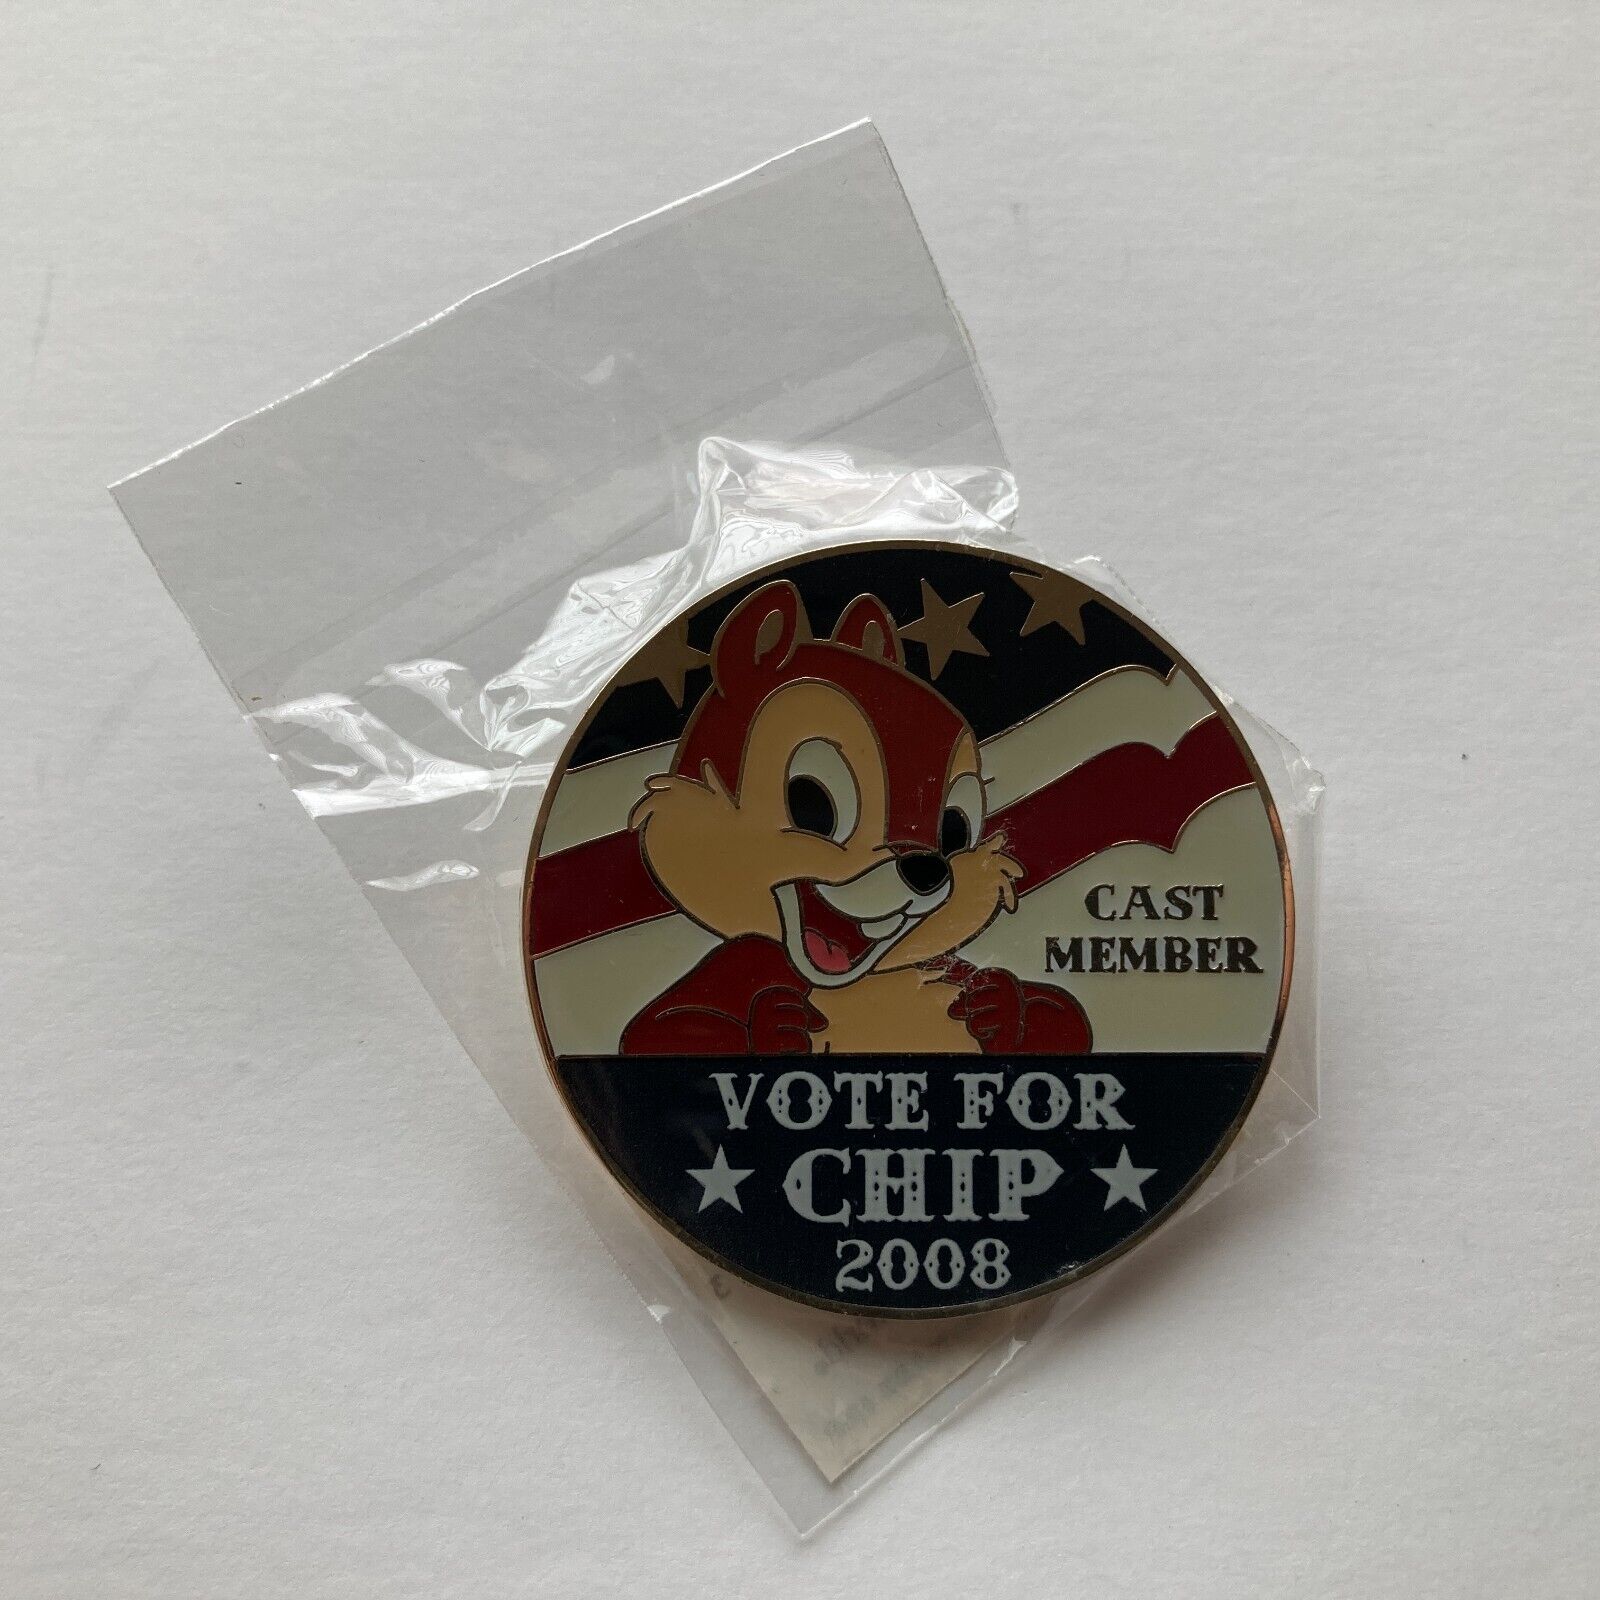 WDW - Cast Member Exclusive - Vote for Chip 2008 - LE 500 Disney Pin 64342